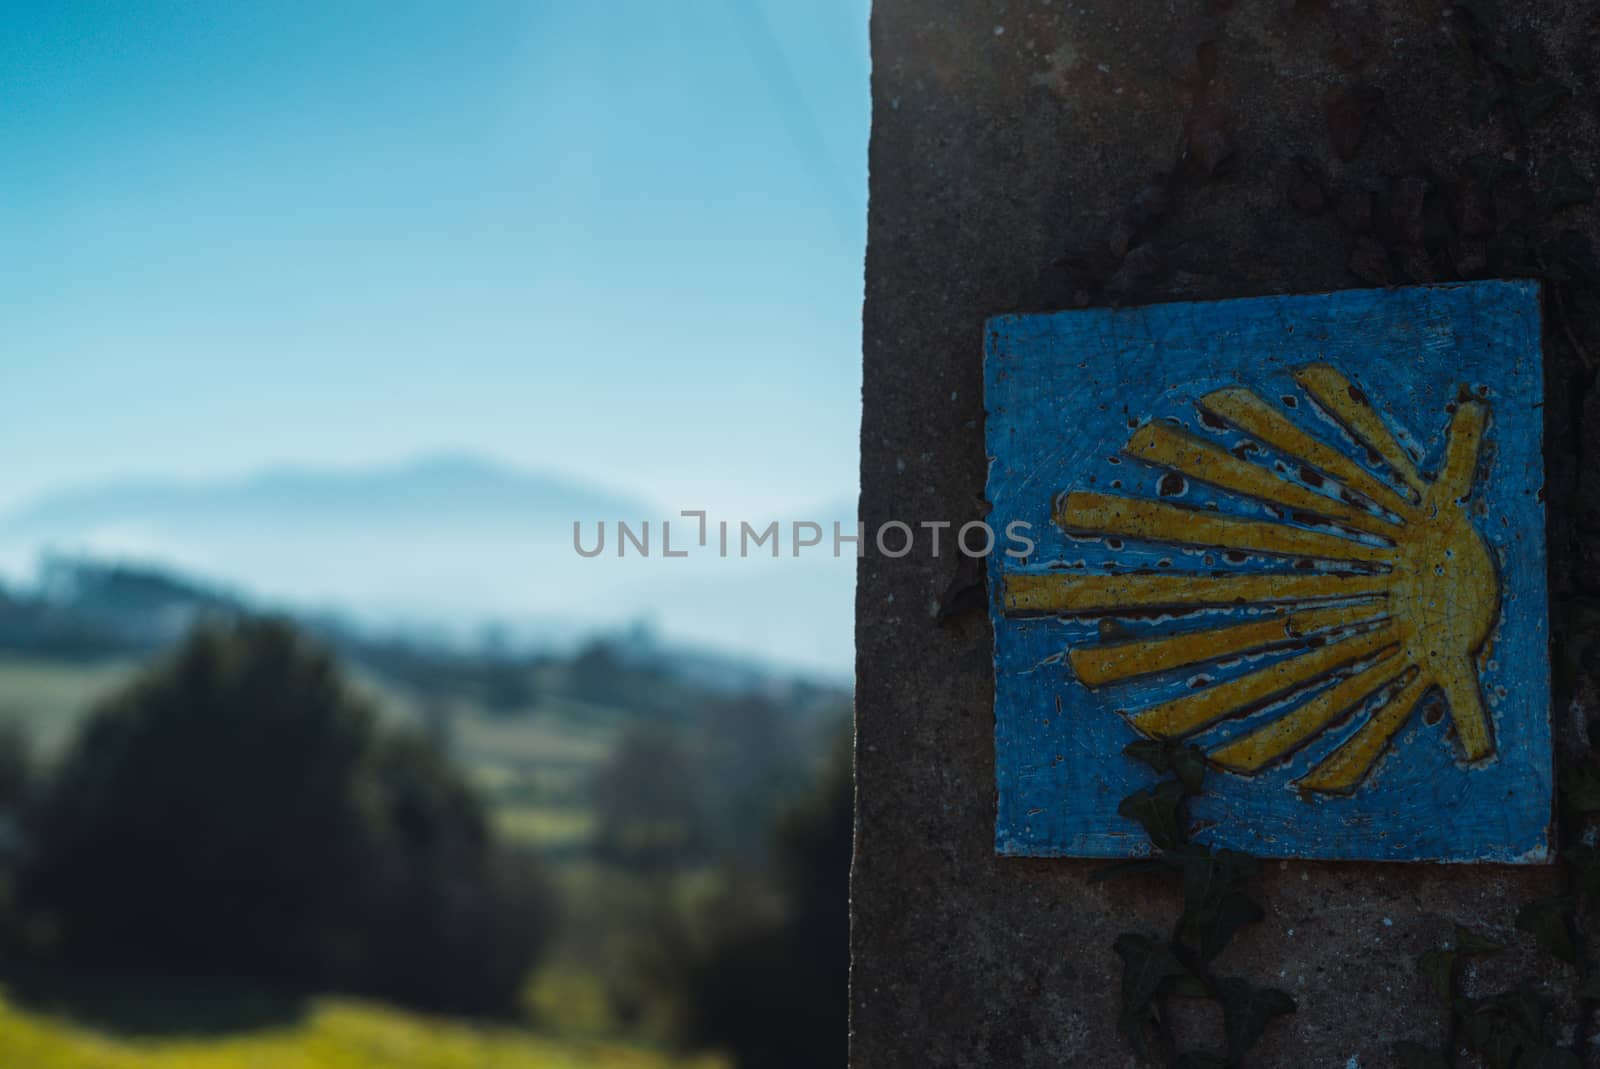 camino de santiago sign in a wall with mountain and trees in the background